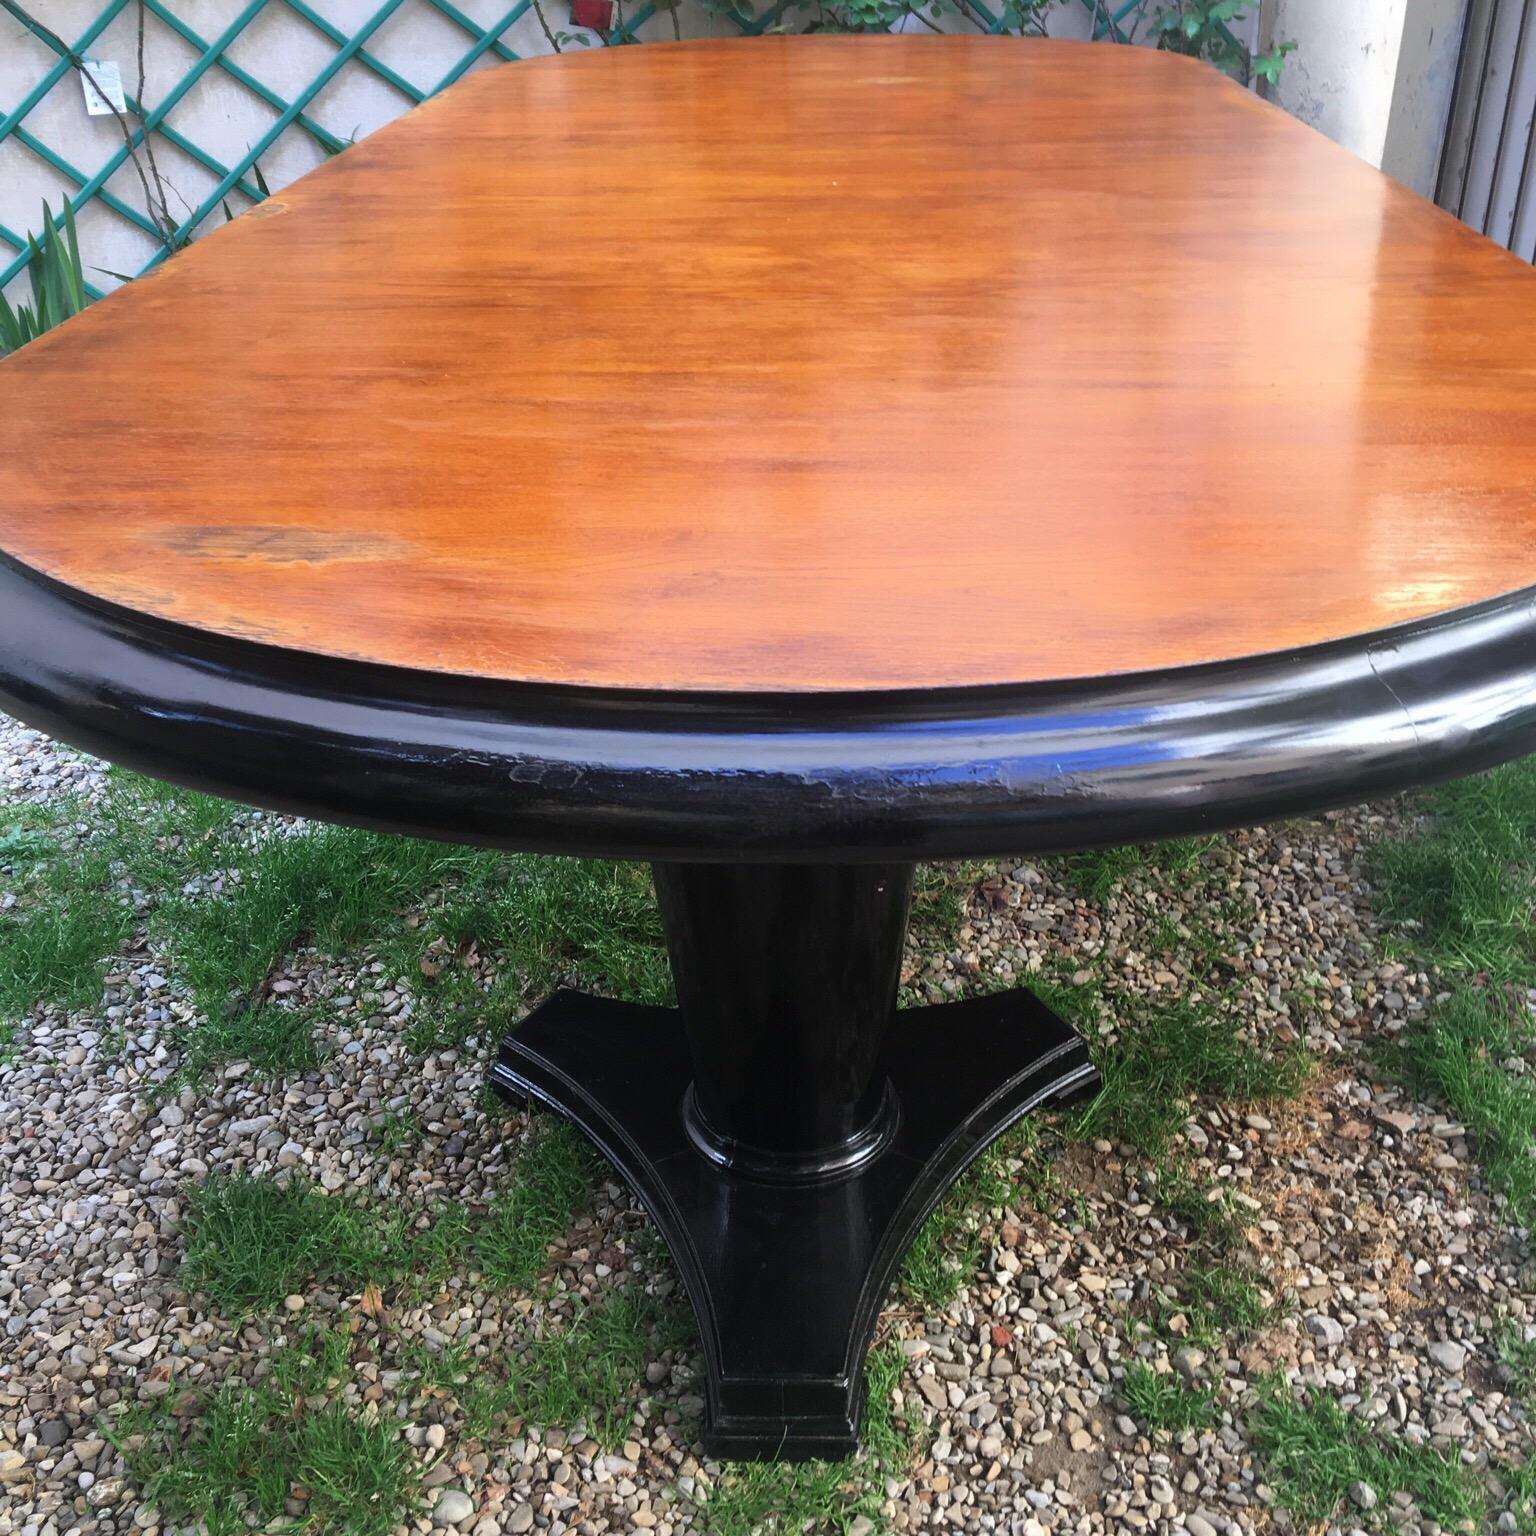 Art Deco Oval Dining Table in Mahogany Wood with Black Ebonized Edge, 1940s For Sale 2